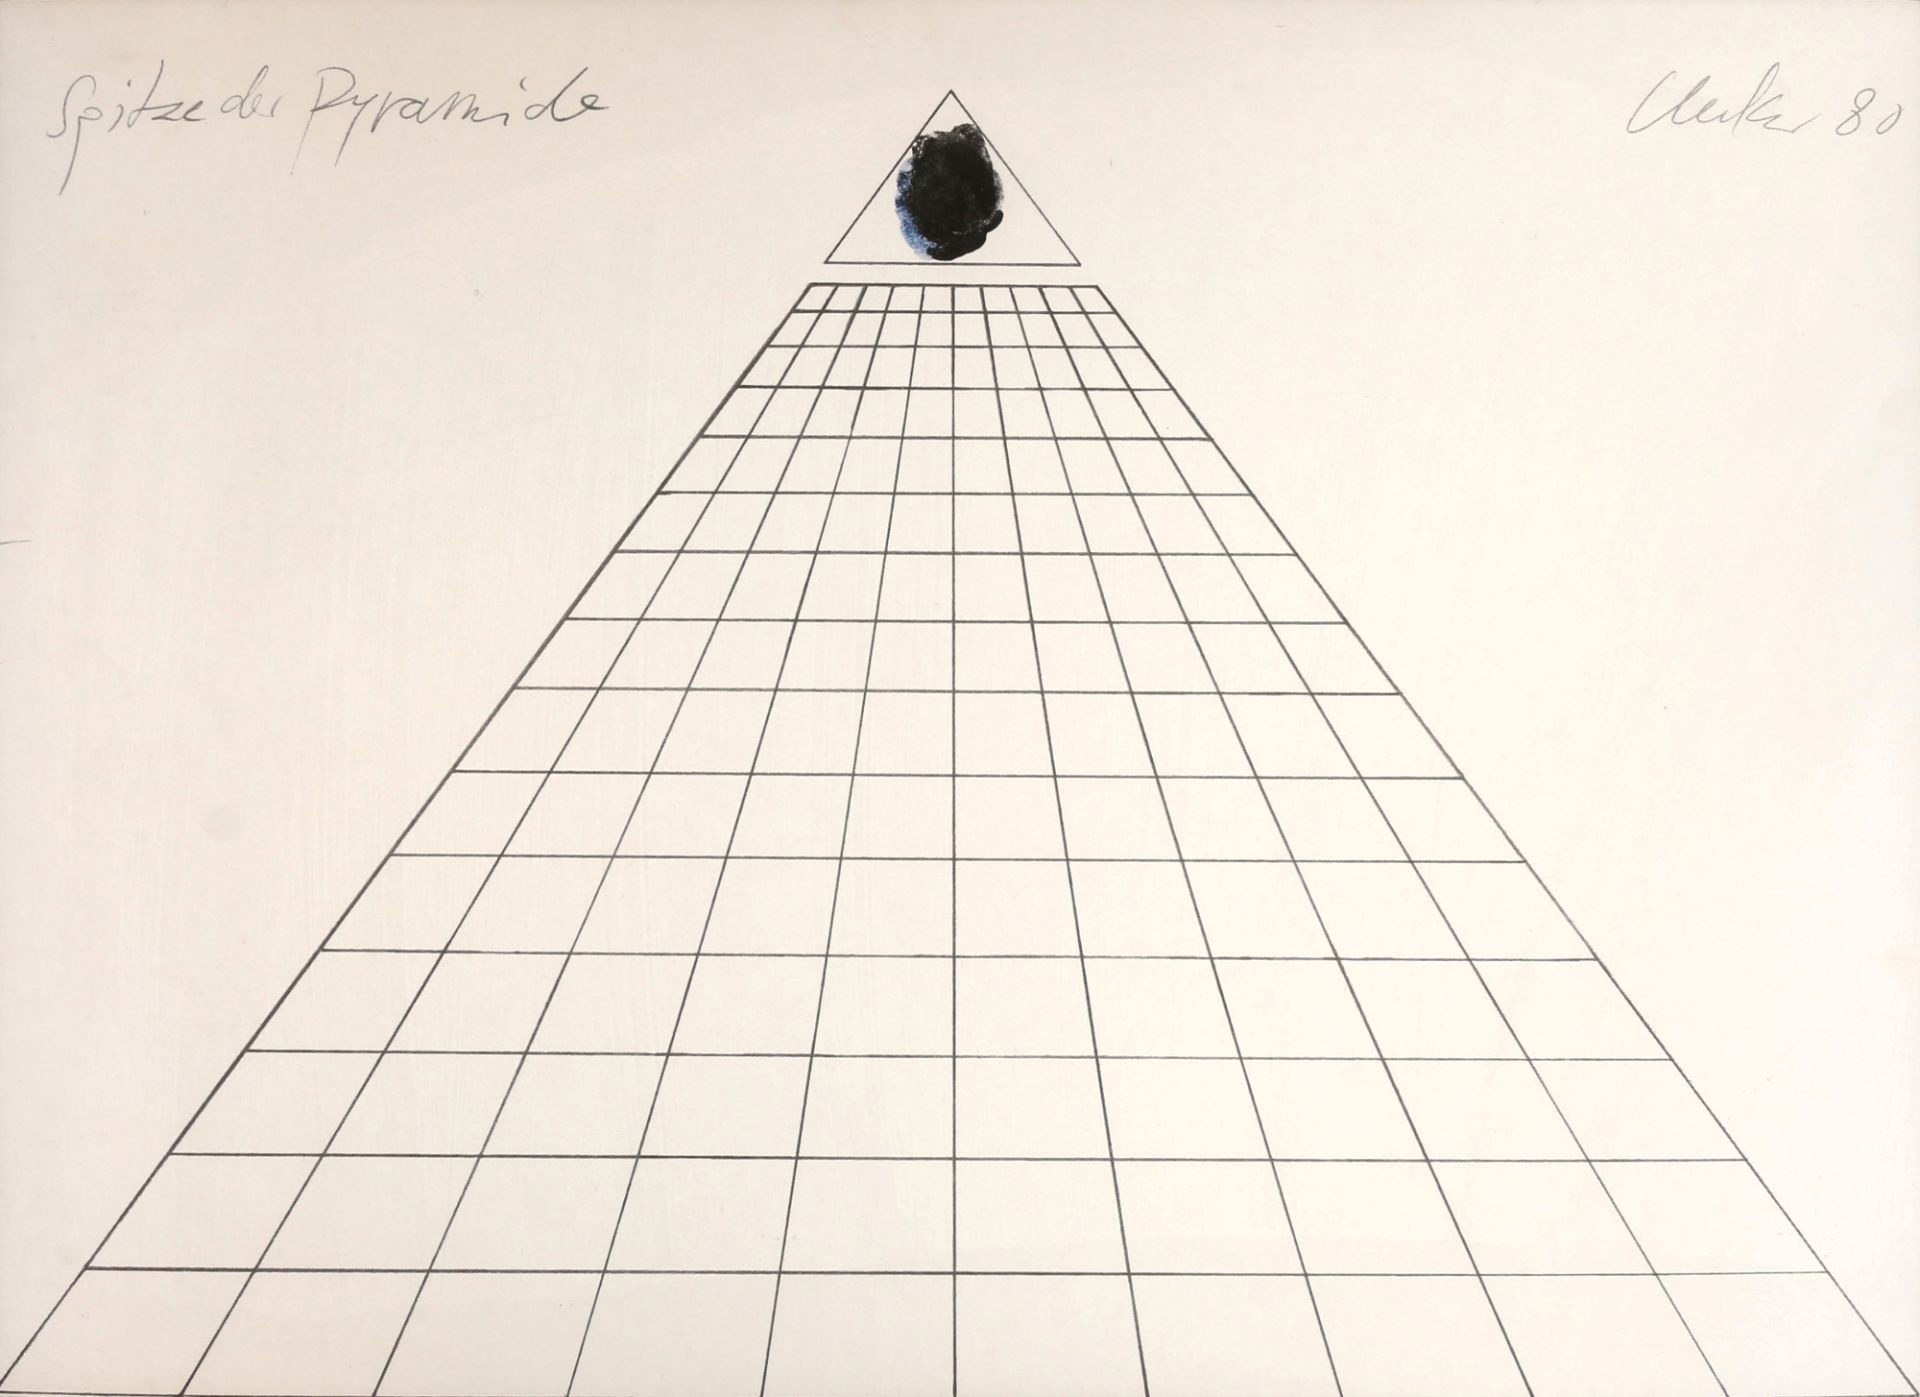 Günther Uecker (1930) lithography top of the pyramid, Lithografie Spitze der Payramide,